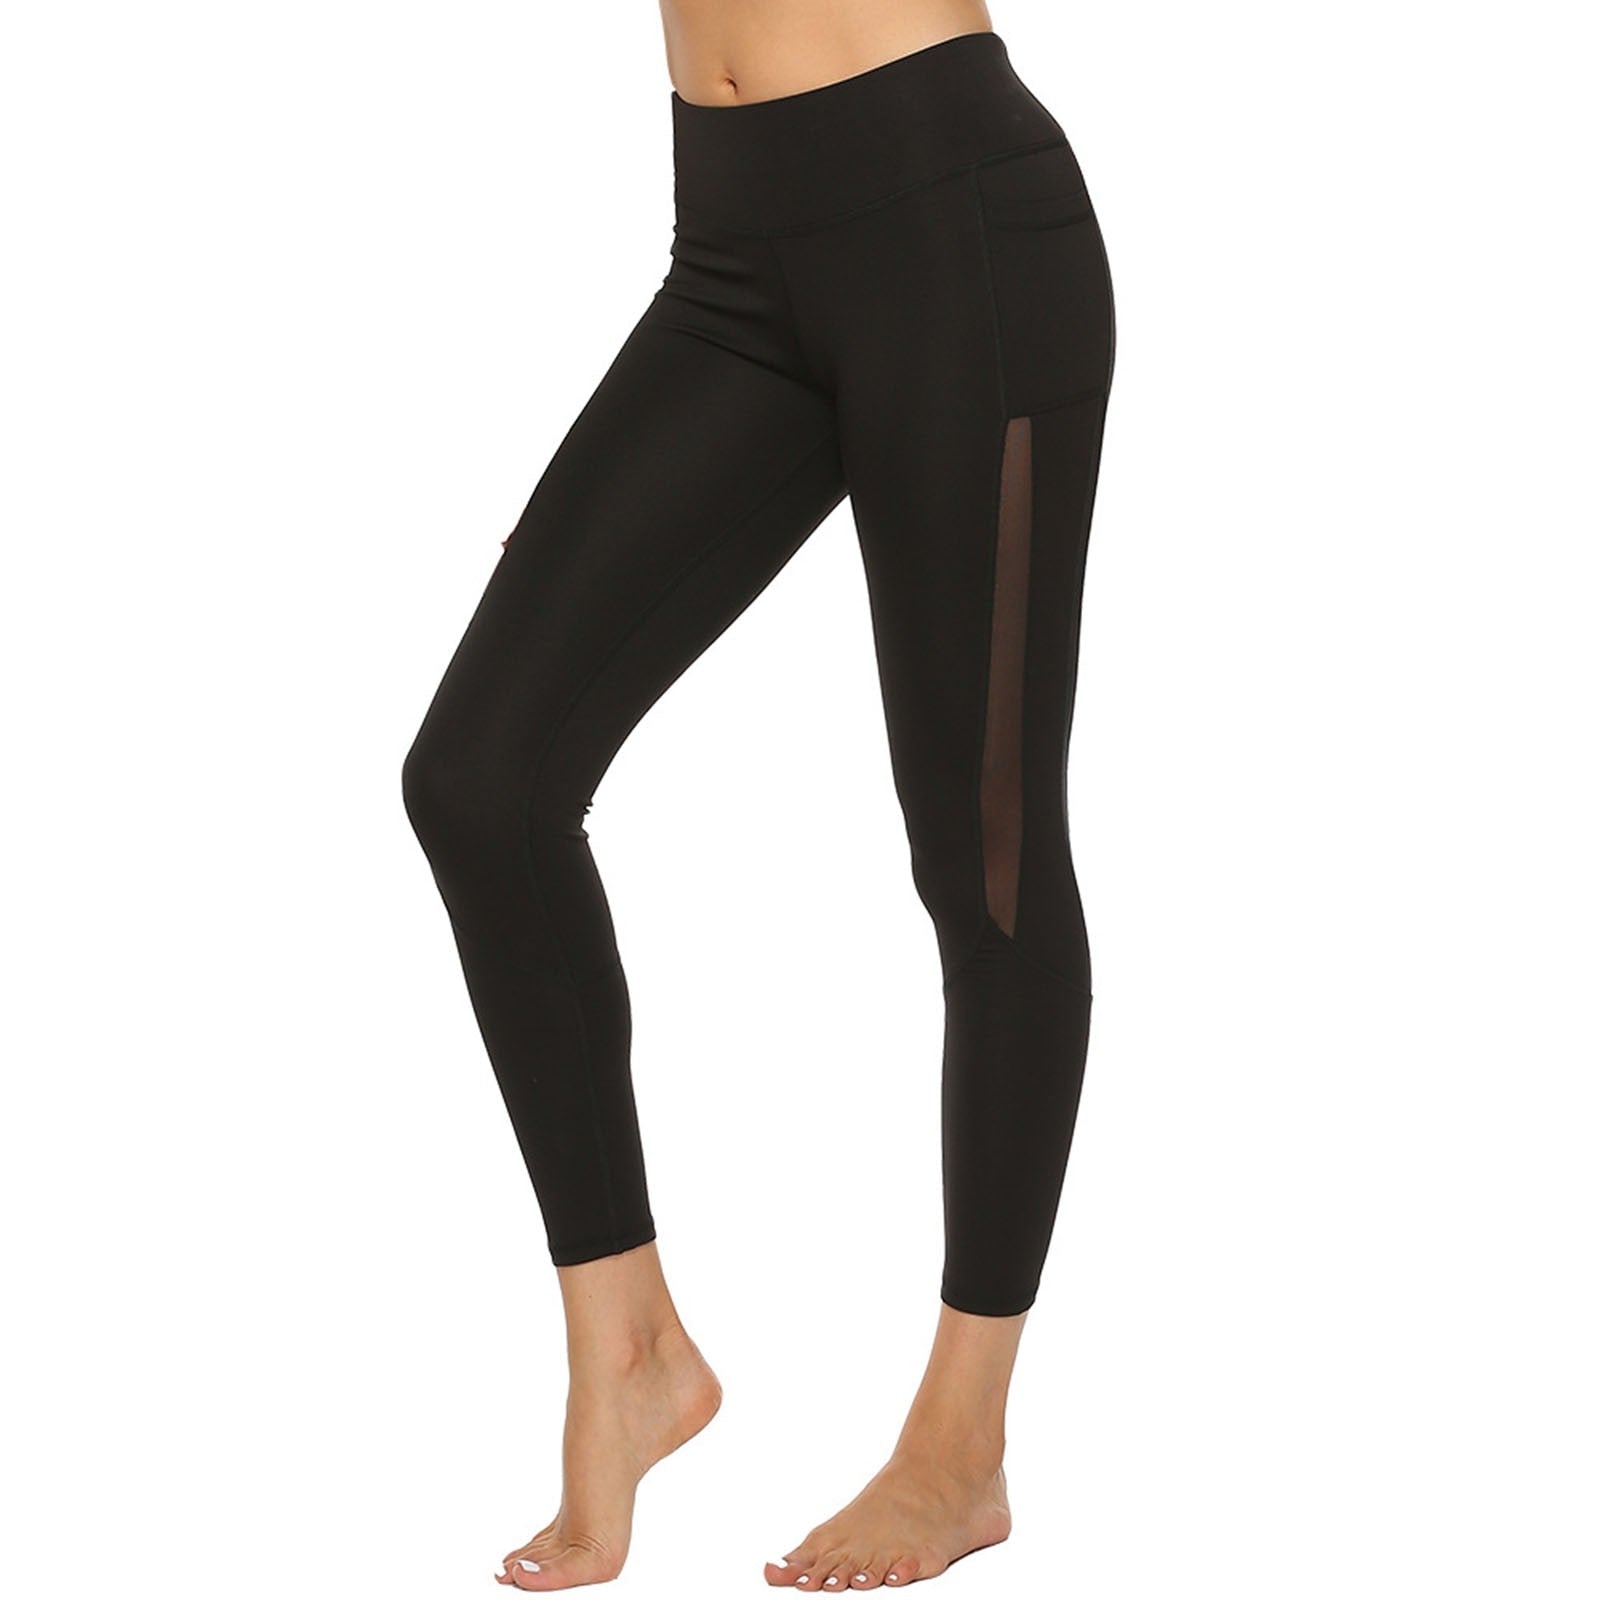 Women's tights high waist stretch leggings - Find Epic Store